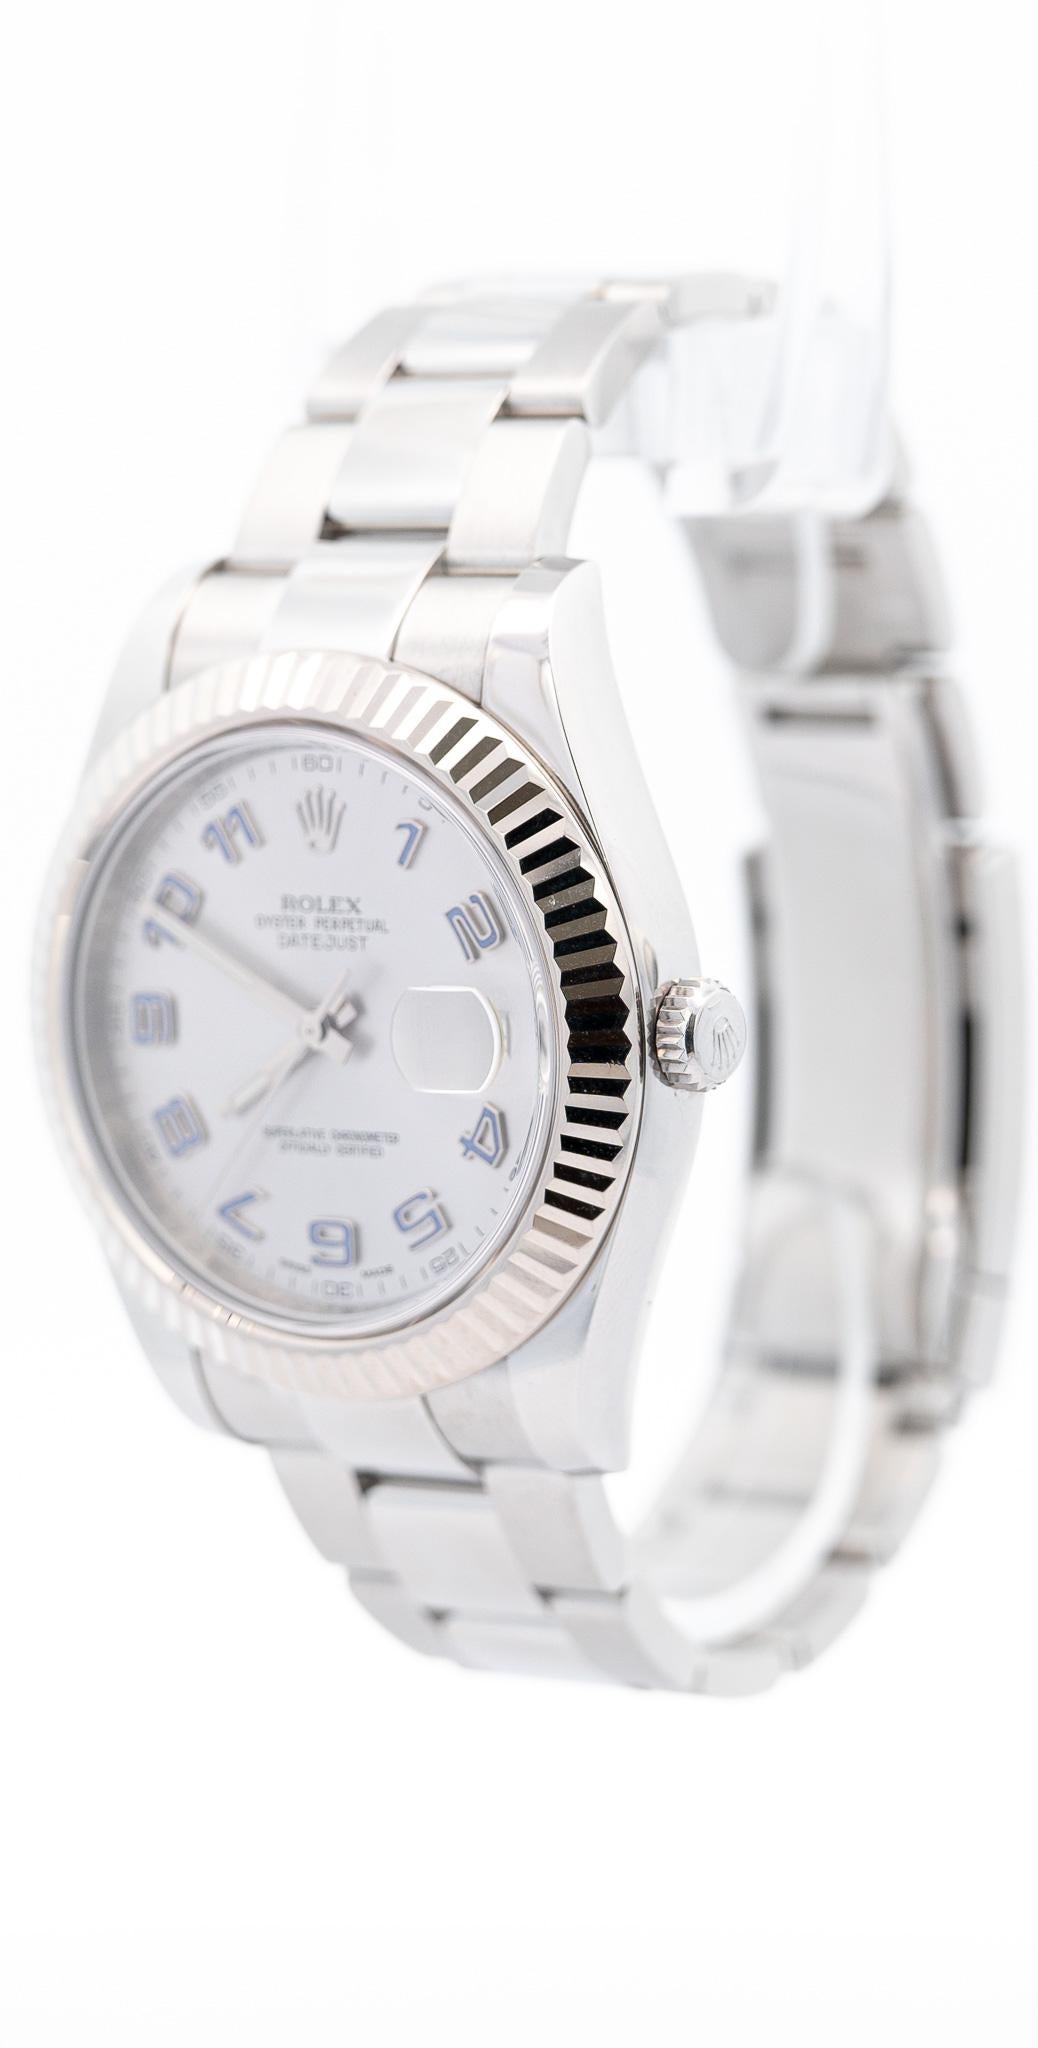 Rolex Datejust II Men's 41mm Stainless Steel and White Gold Bezel Watch 116334